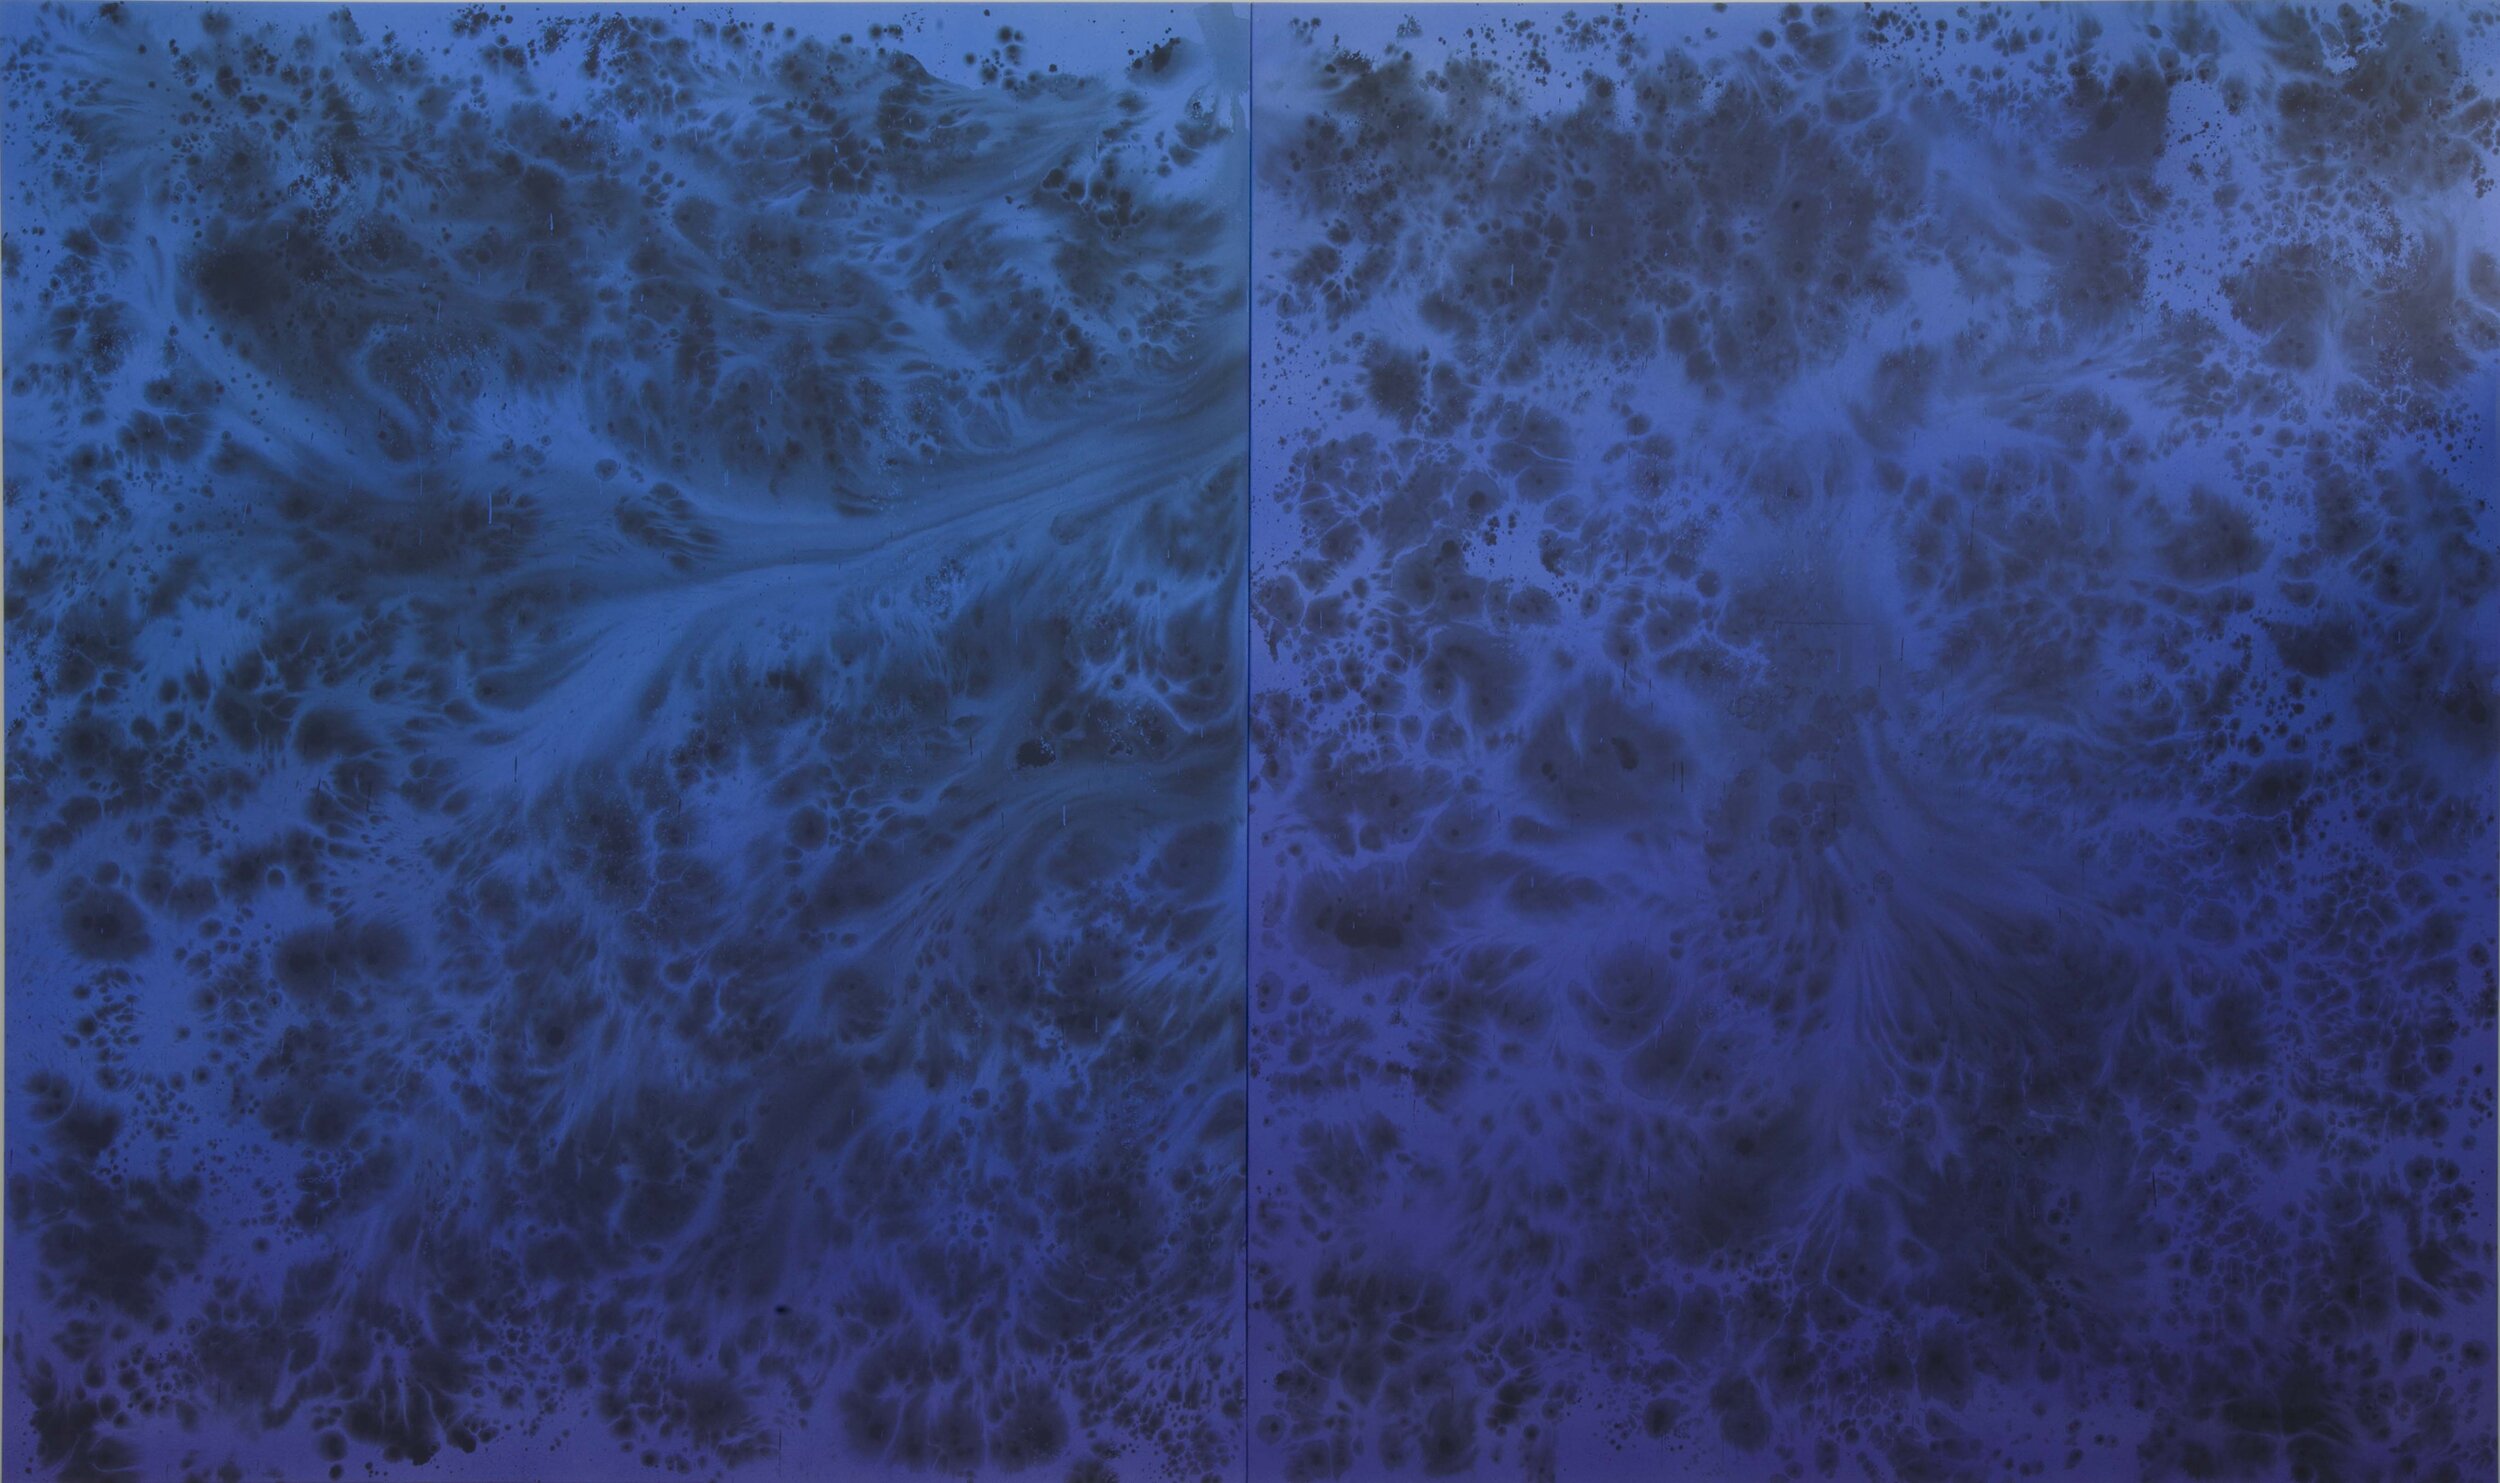   Painting made to fit the wall of Galerie Parisa Kind, In Cerulean and Violet 1 &amp; 2,  2014. Acrylic on canvas, 106.5 x 181.5 inches 